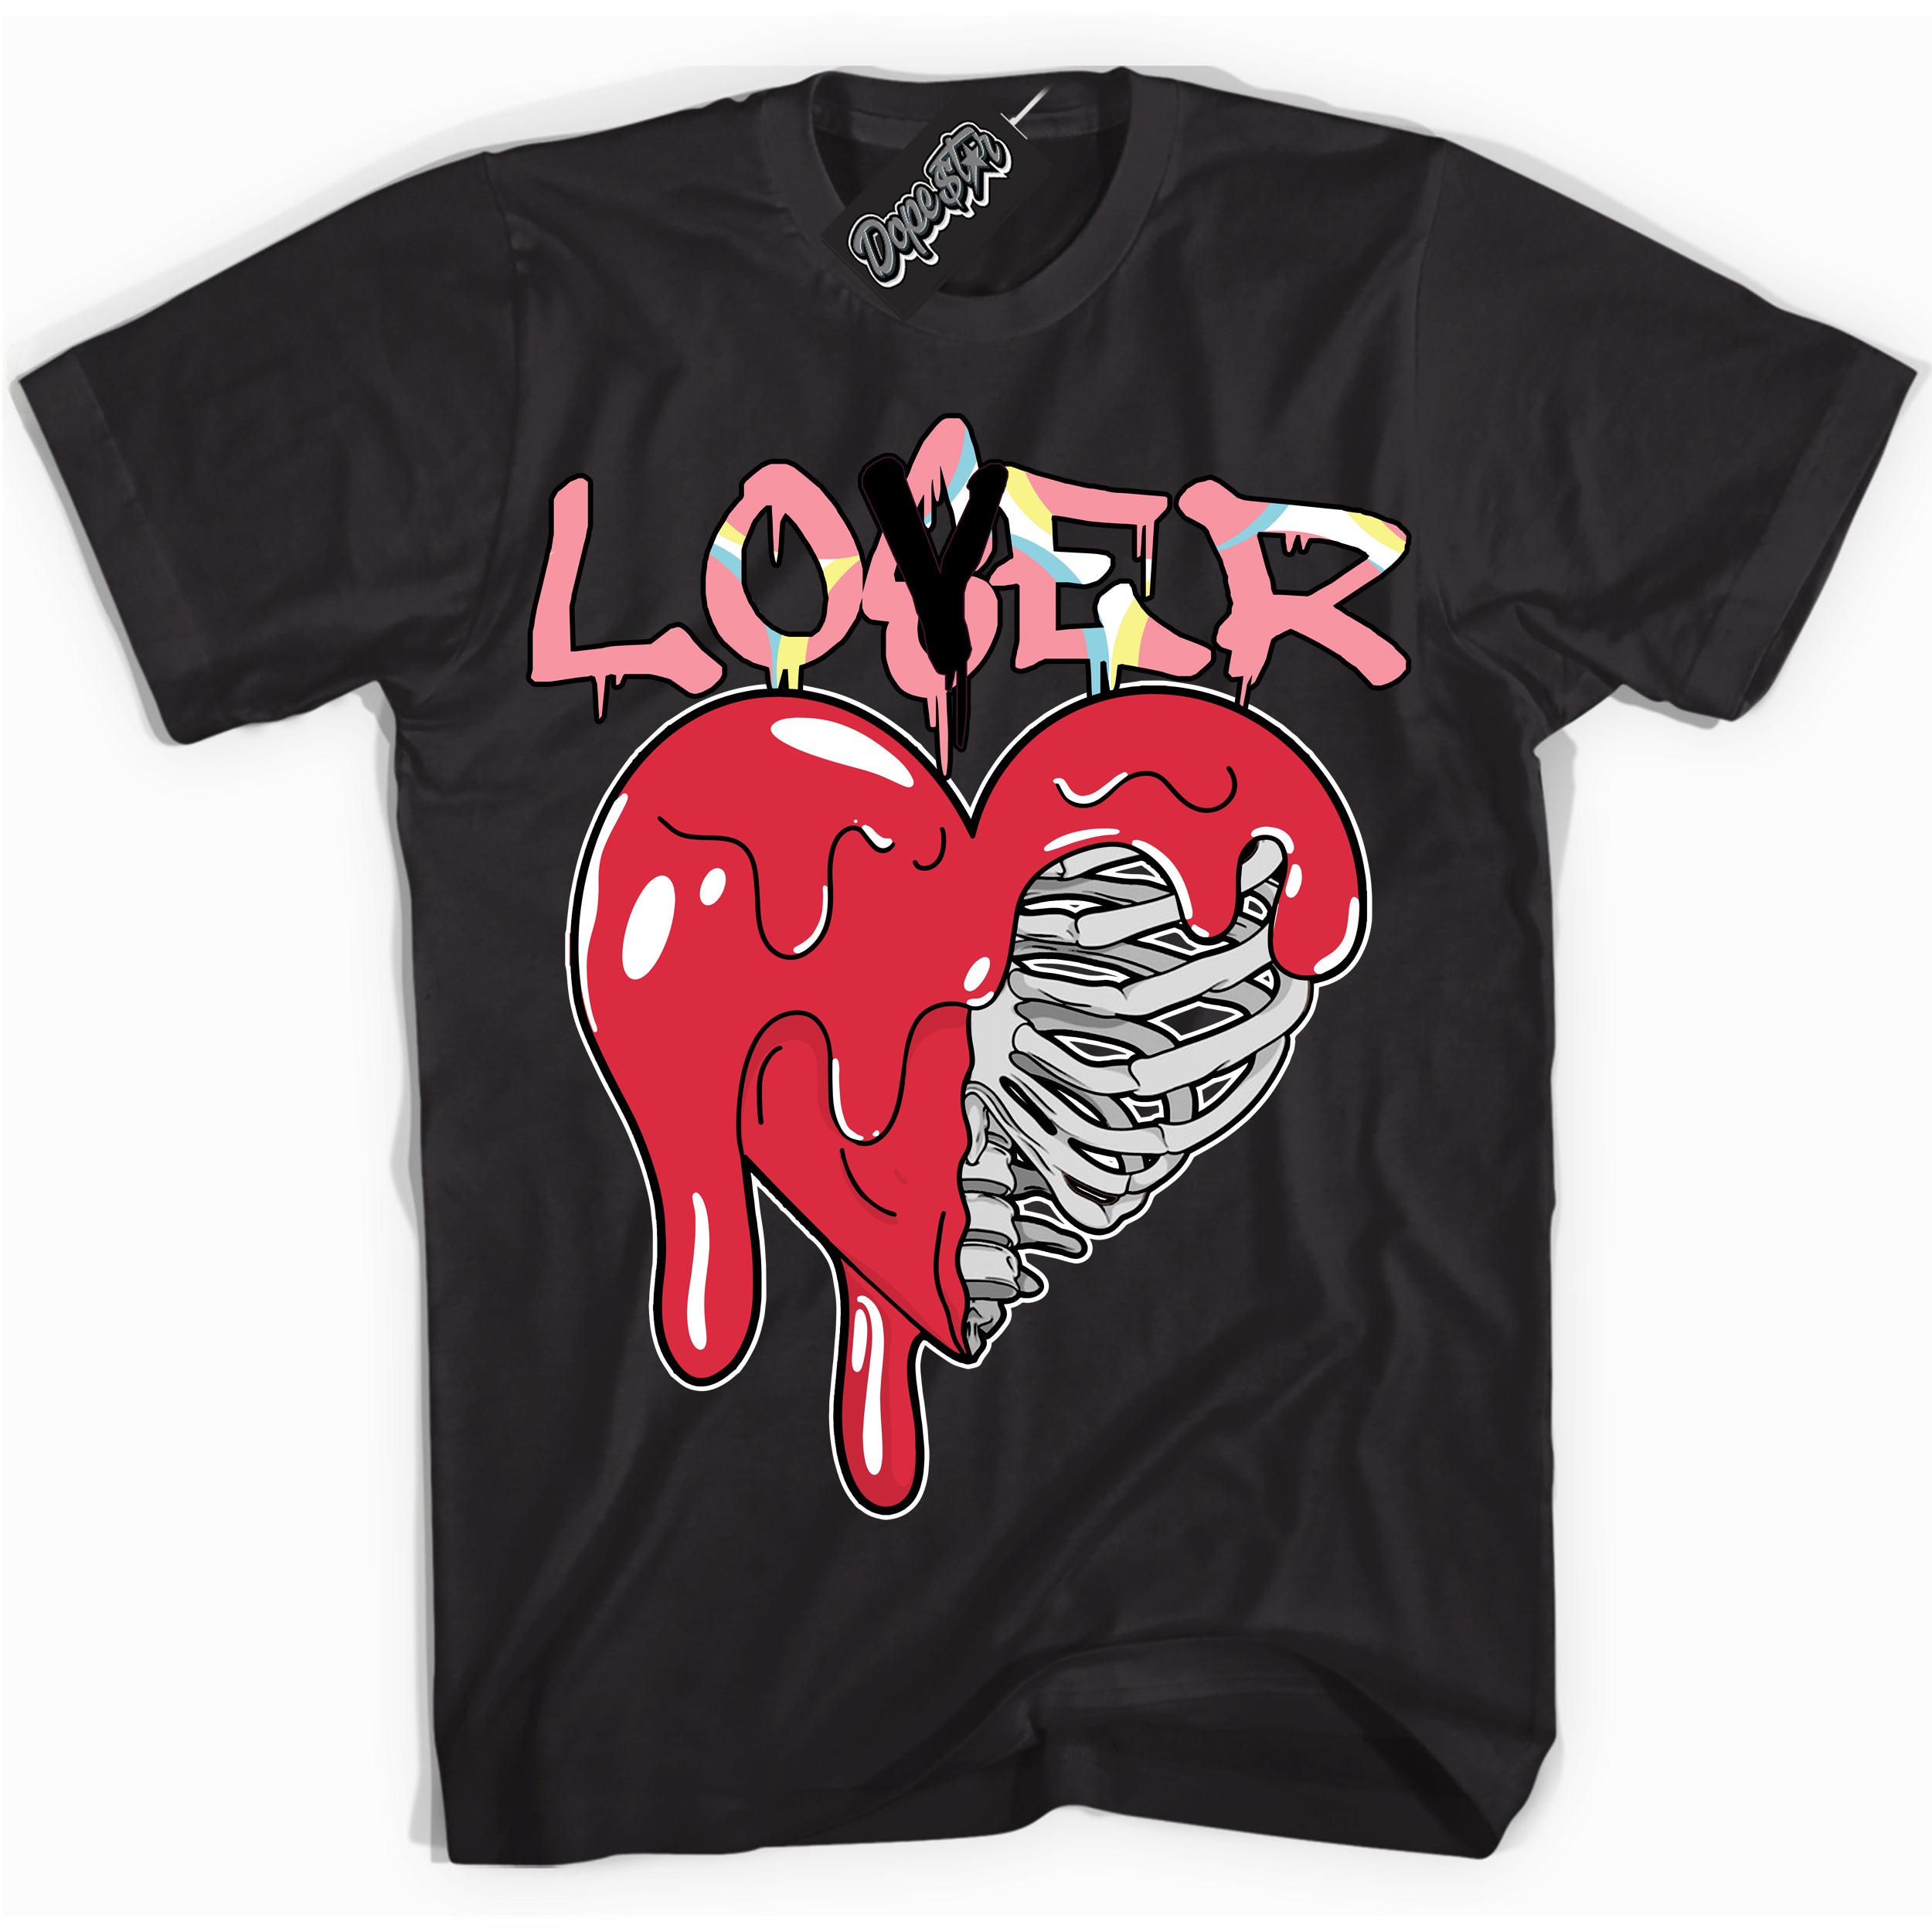 Cool Black graphic tee with “ Lover Loser ” design, that perfectly matches Spider-Verse 1s sneakers 